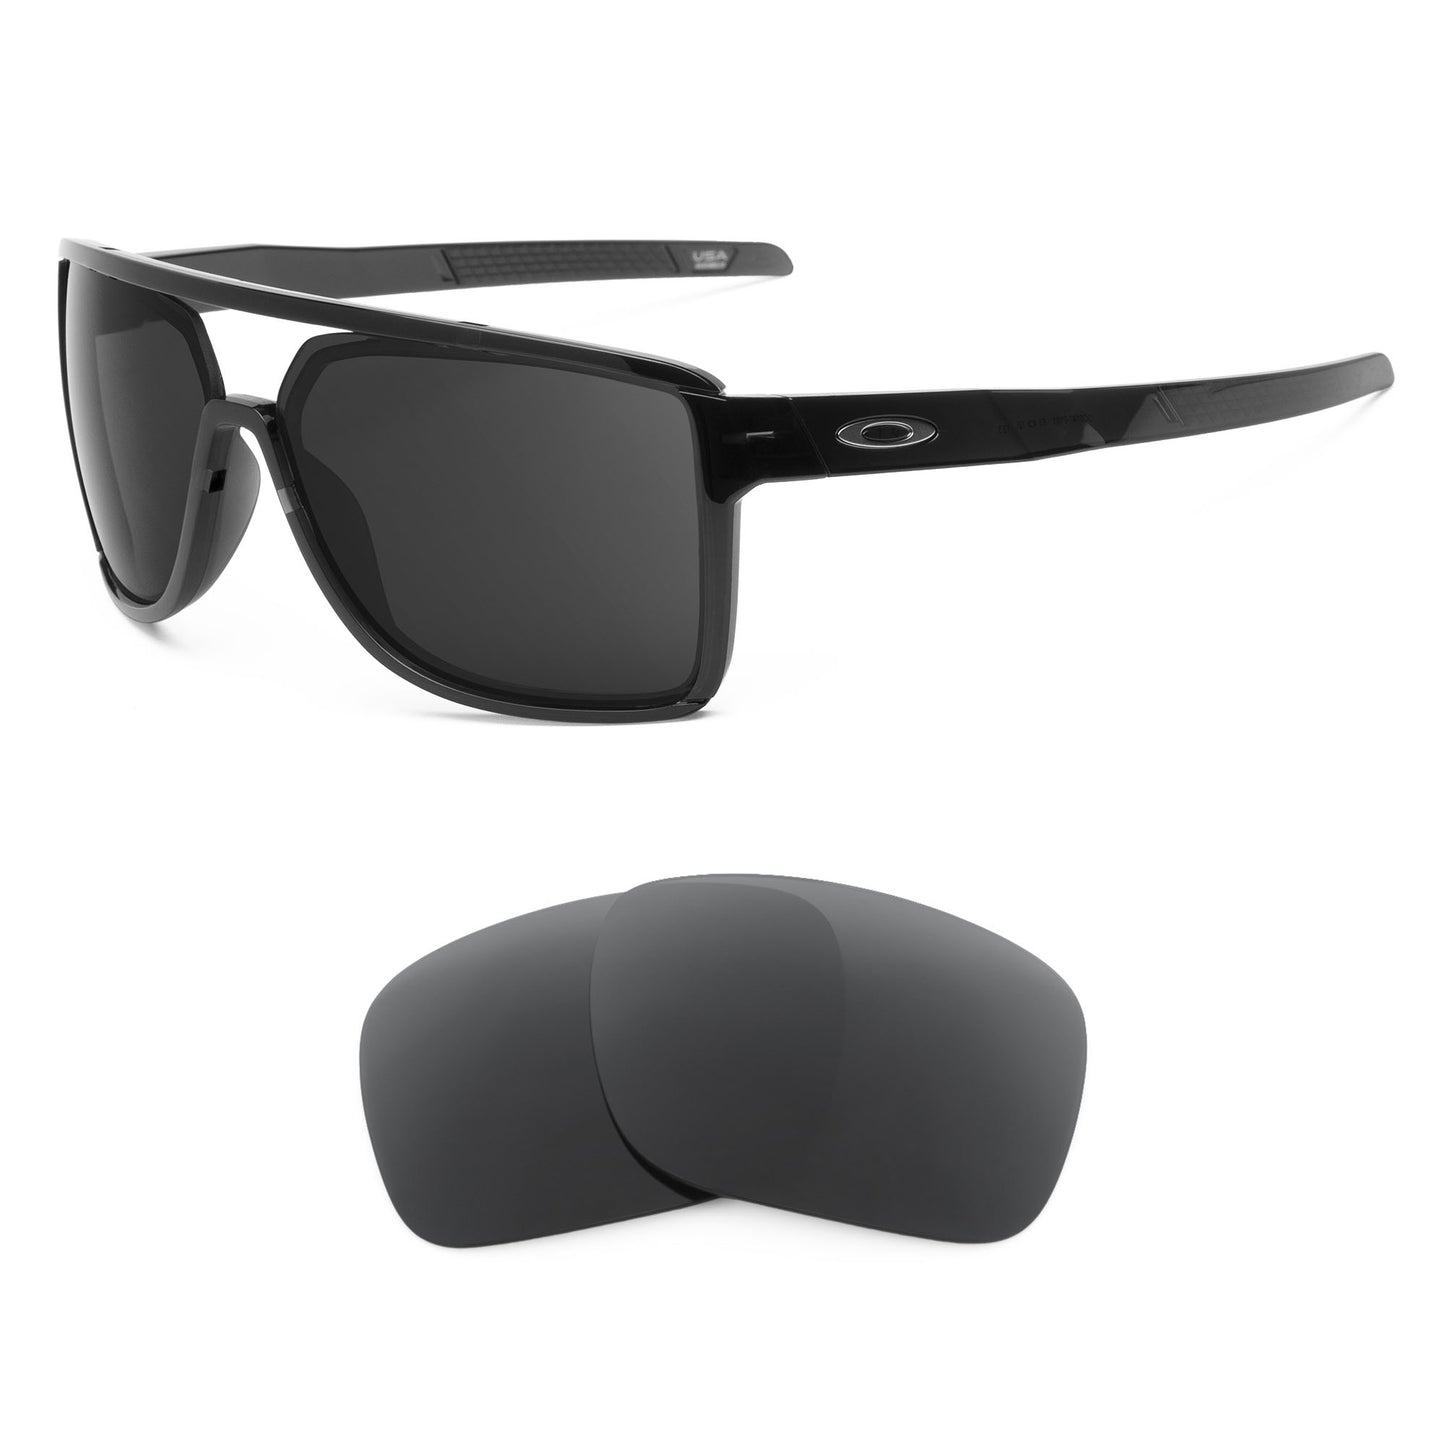 Oakley Castel sunglasses with replacement lenses